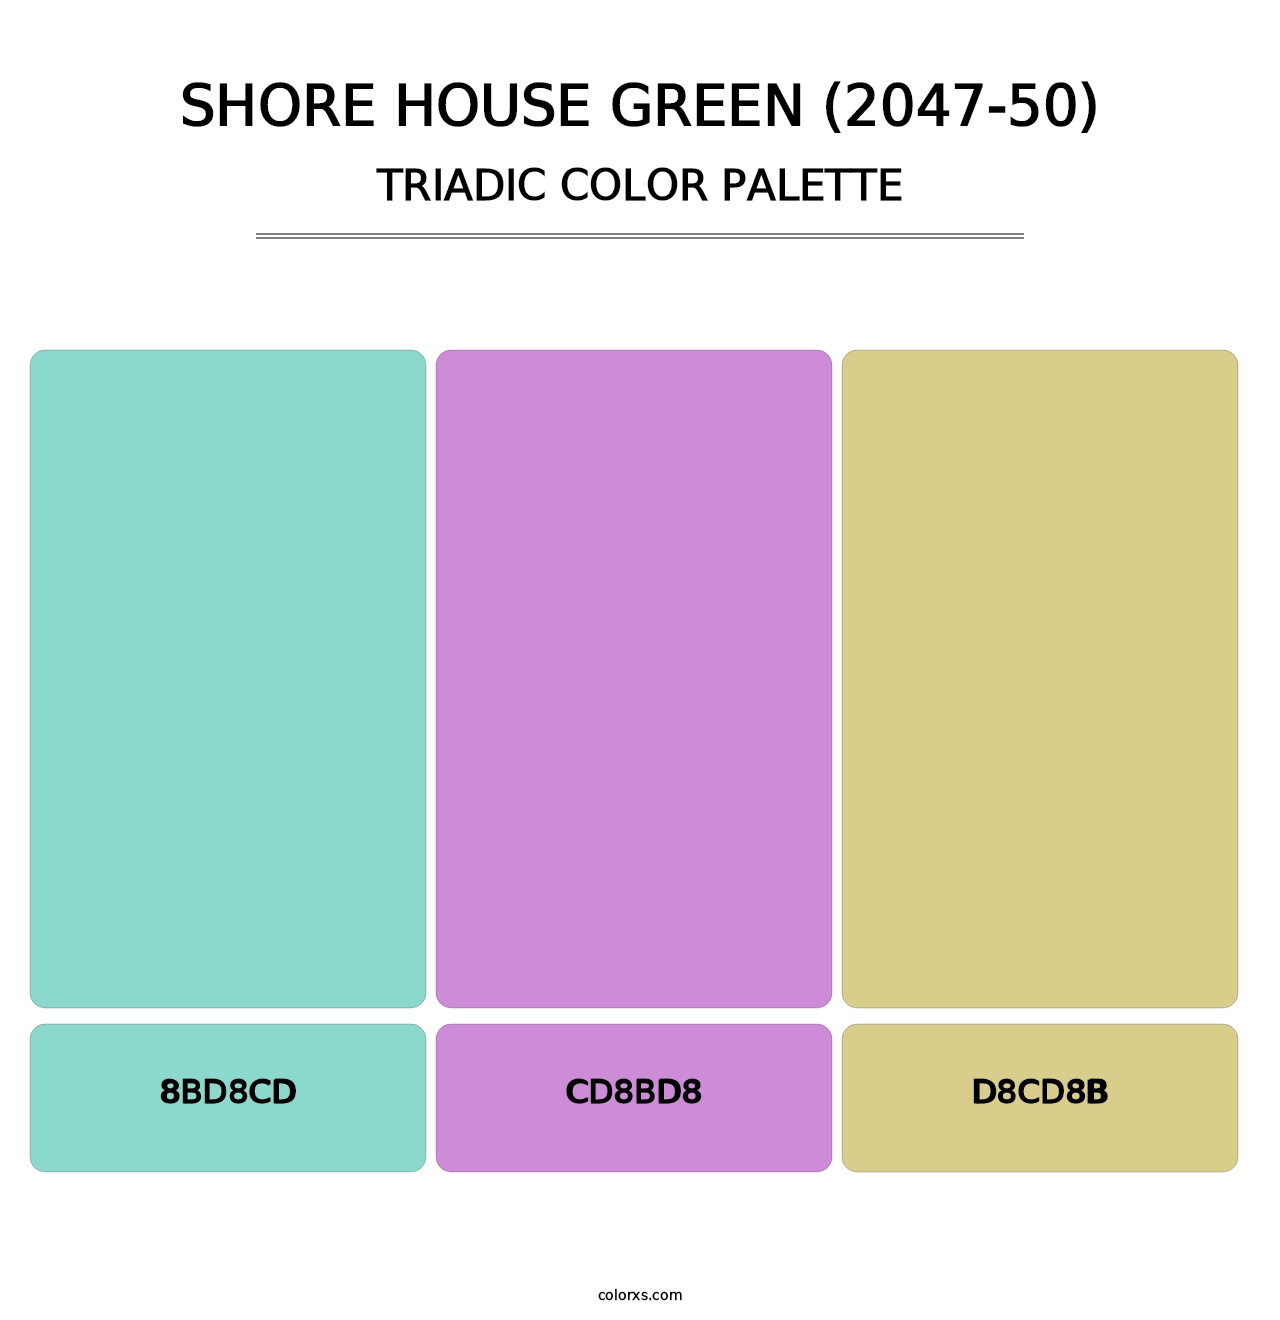 Shore House Green (2047-50) - Triadic Color Palette